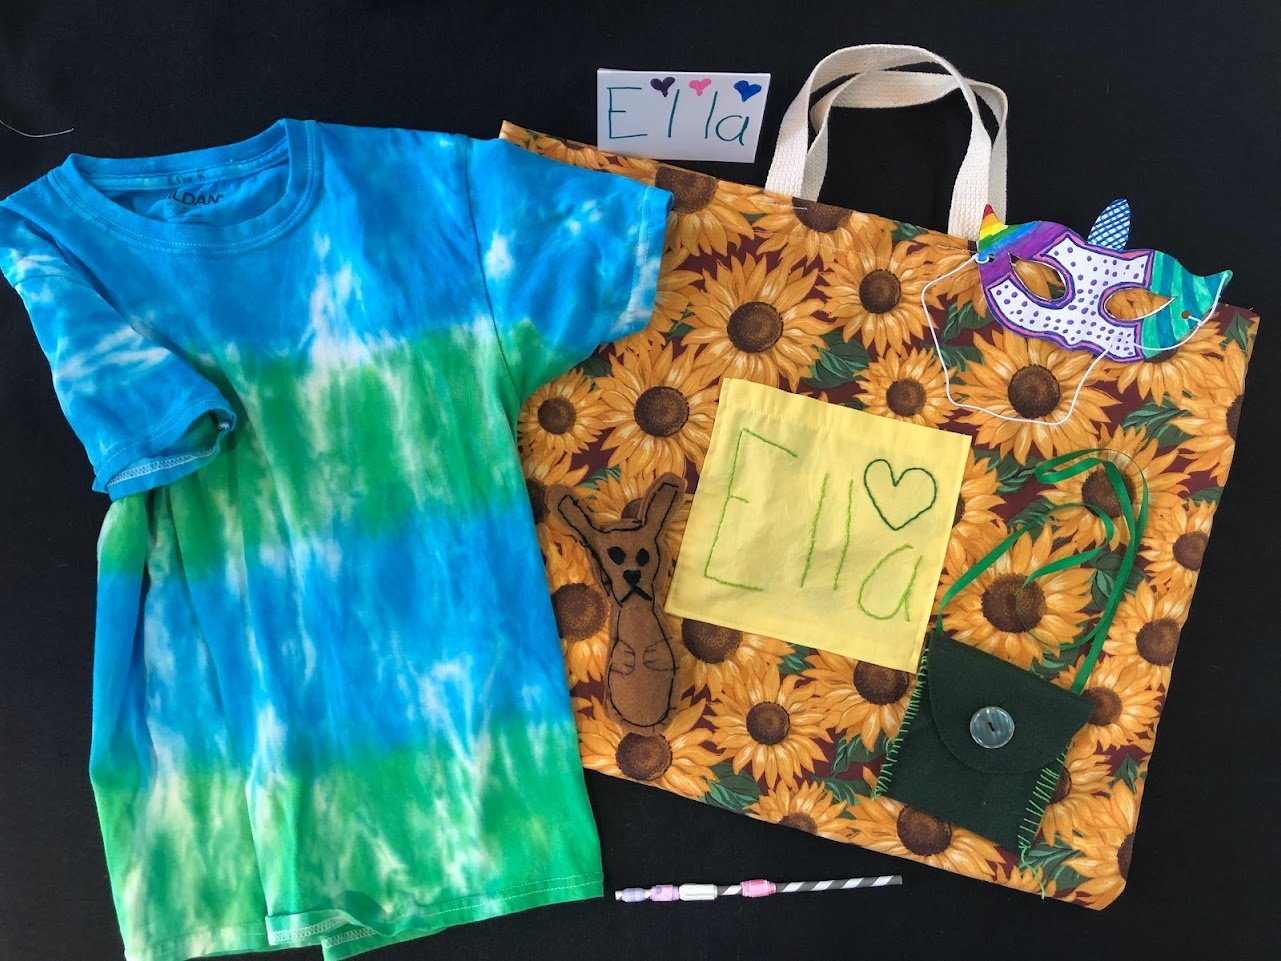 ER's Tie-dyed shirt, Tote with embroidered pocket, Pocket Pouch, and Eye Mask